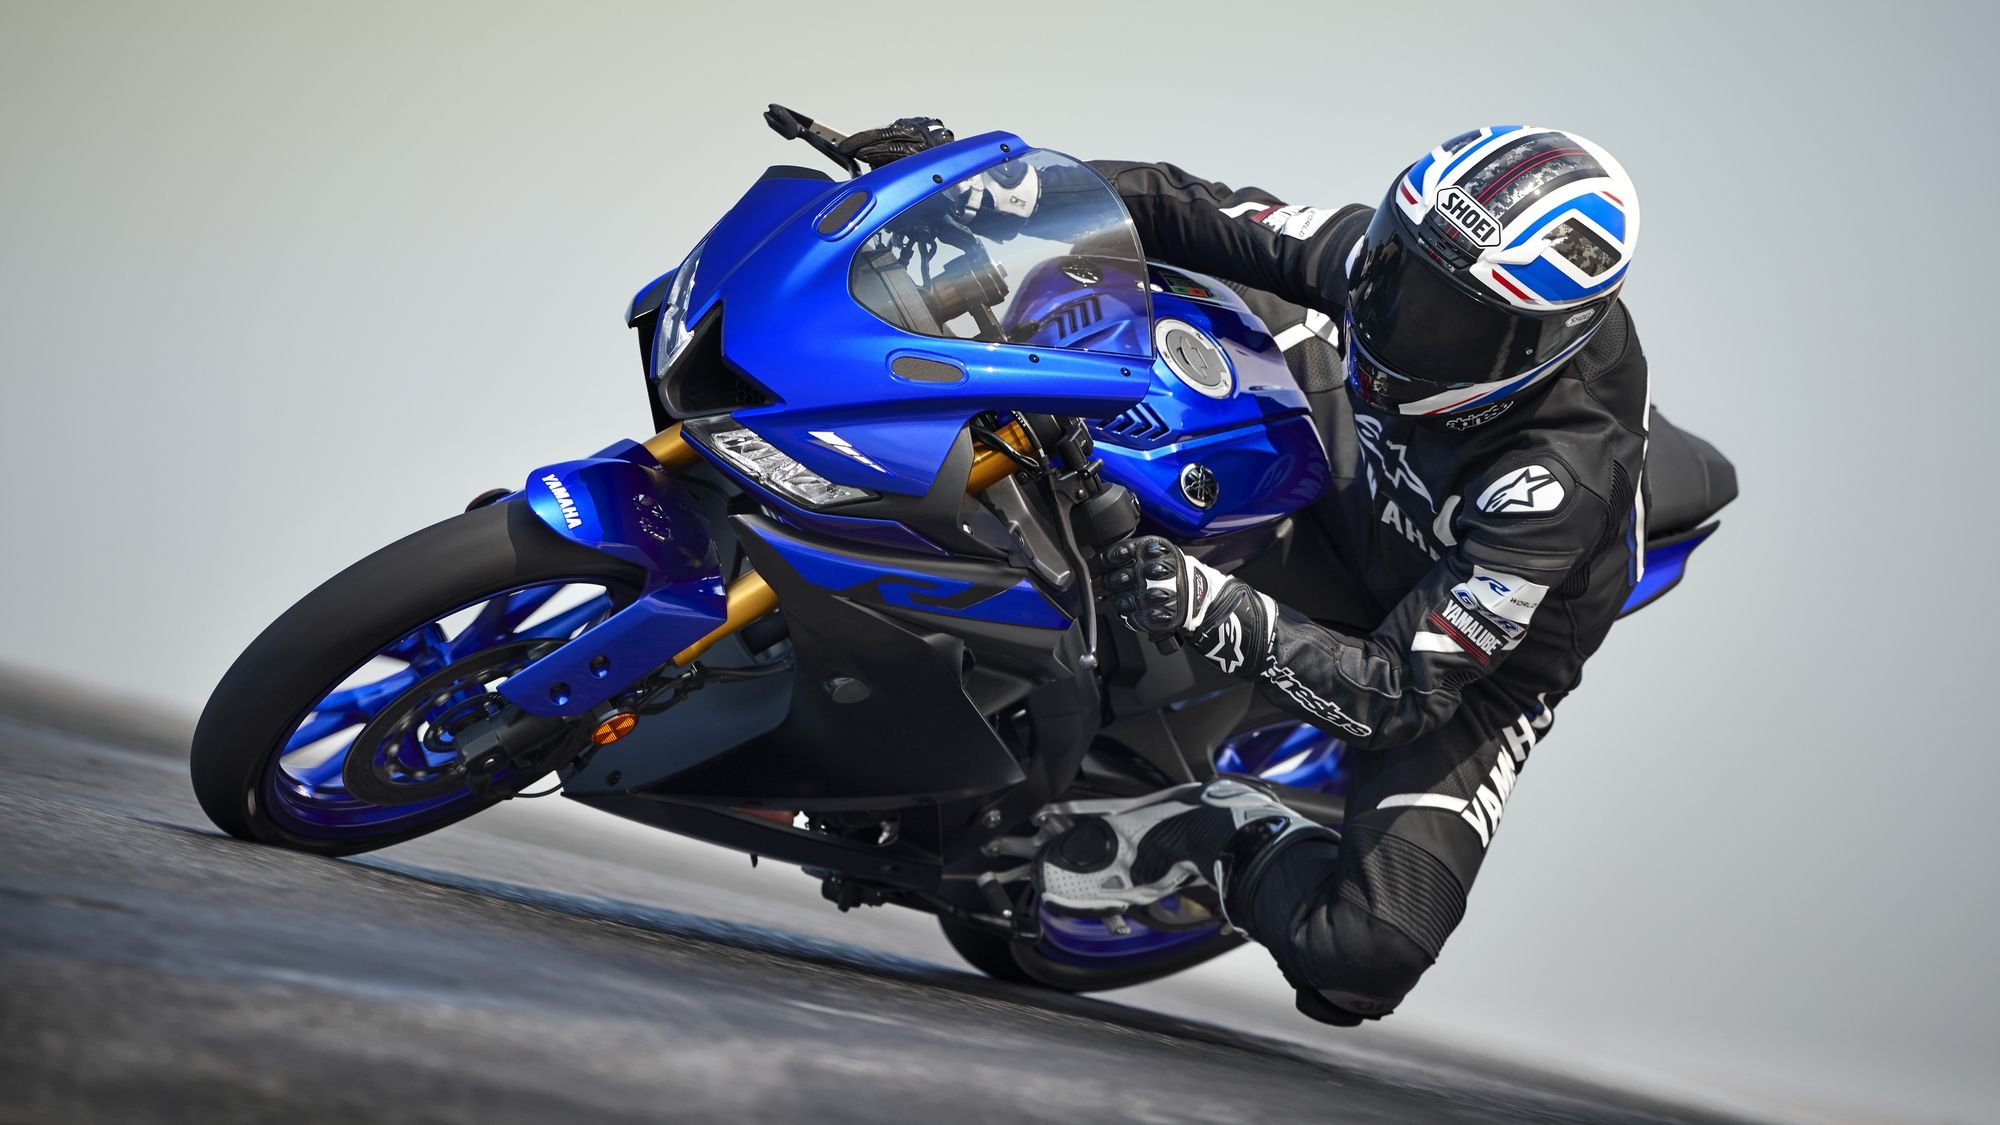 Yamaha YZF R125 Picture, Photo, Wallpaper